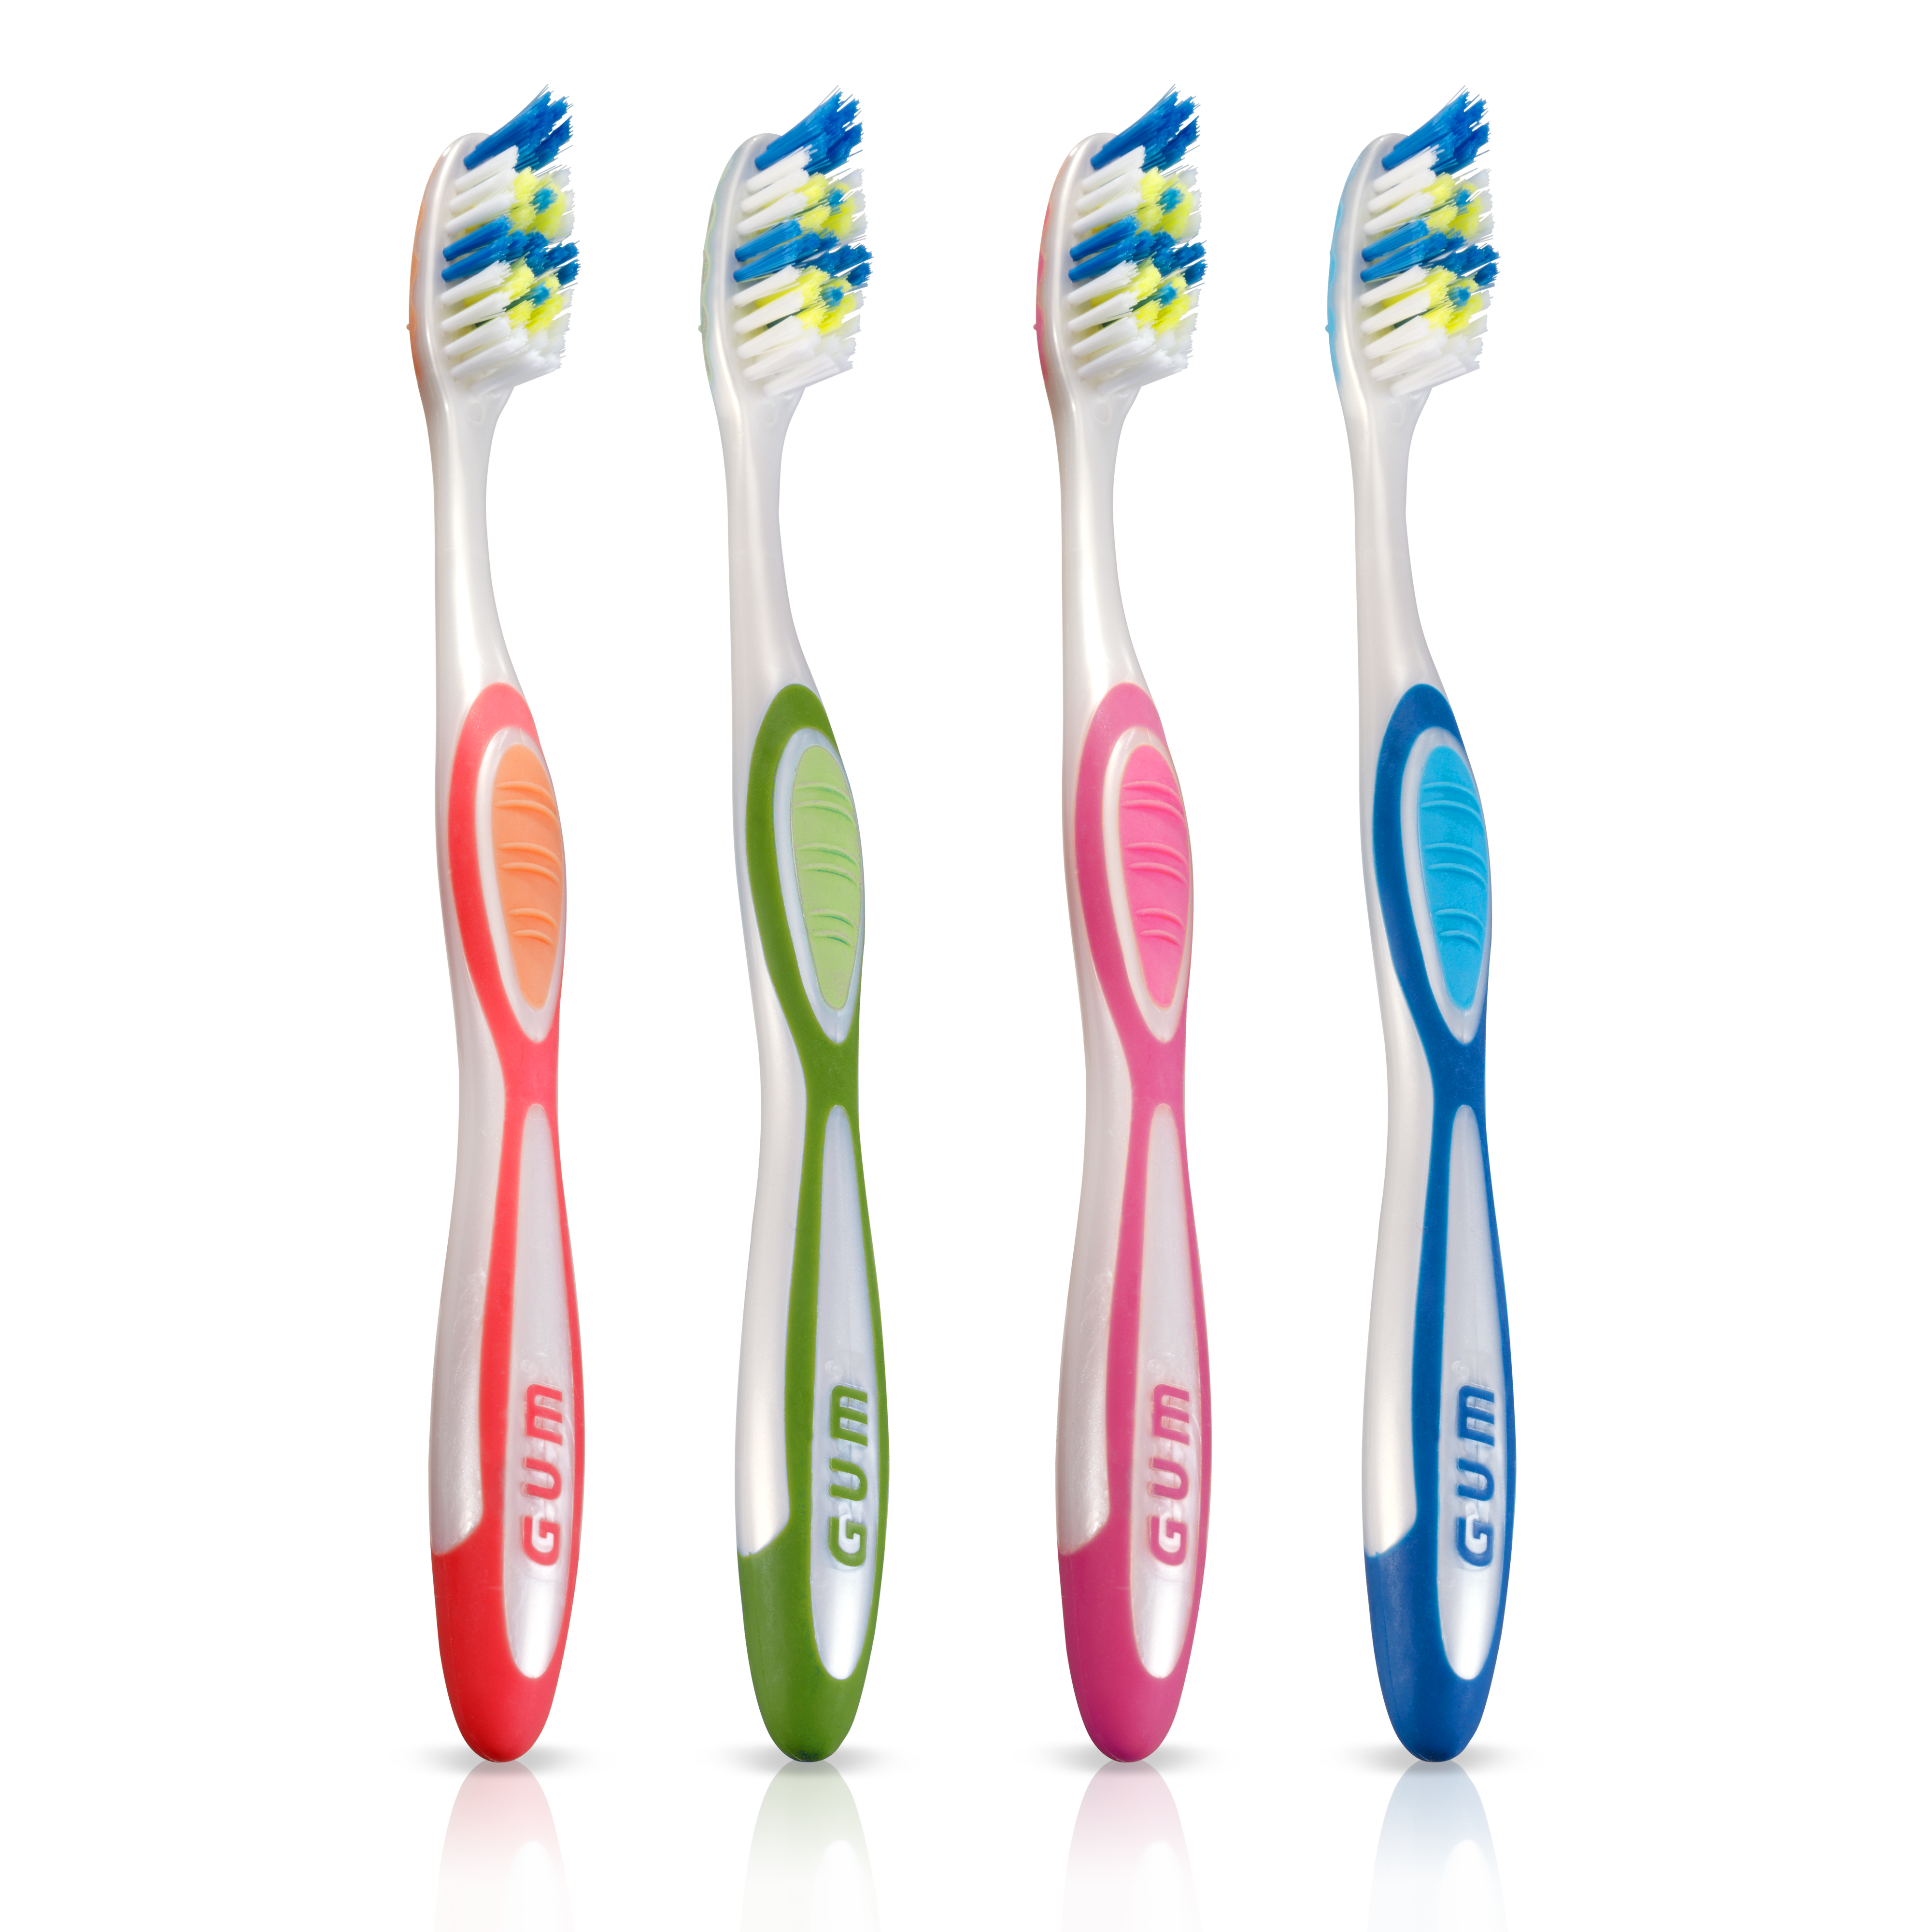 394-Product-Toothbrush-Manual-ToothnTongue-naked-4colors.png